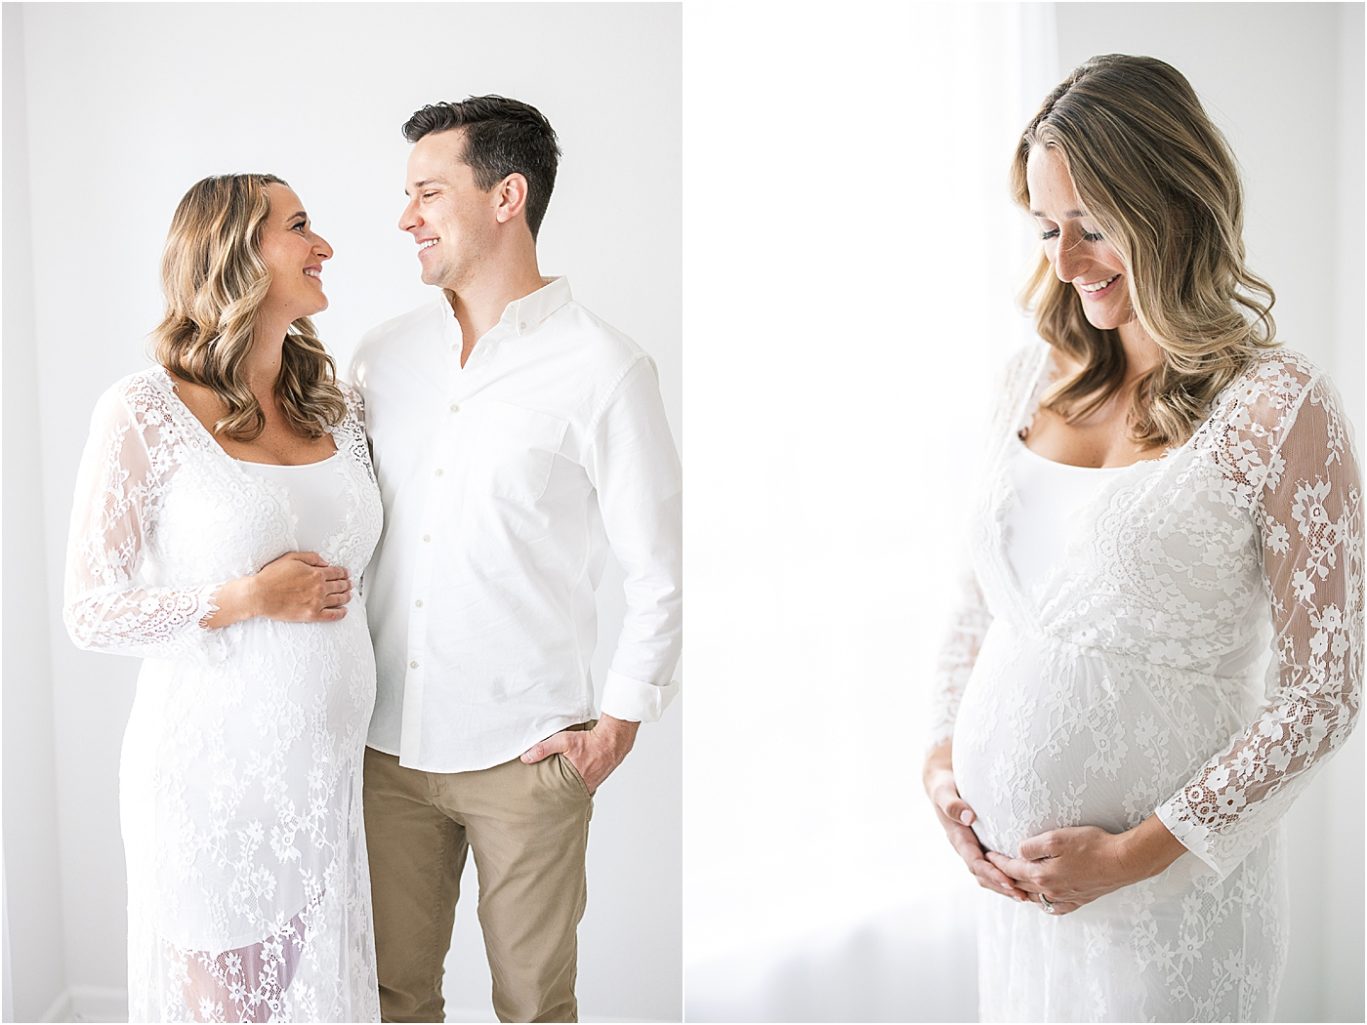 Studio maternity session in Fishers IN with Lindsay Konopa Photography